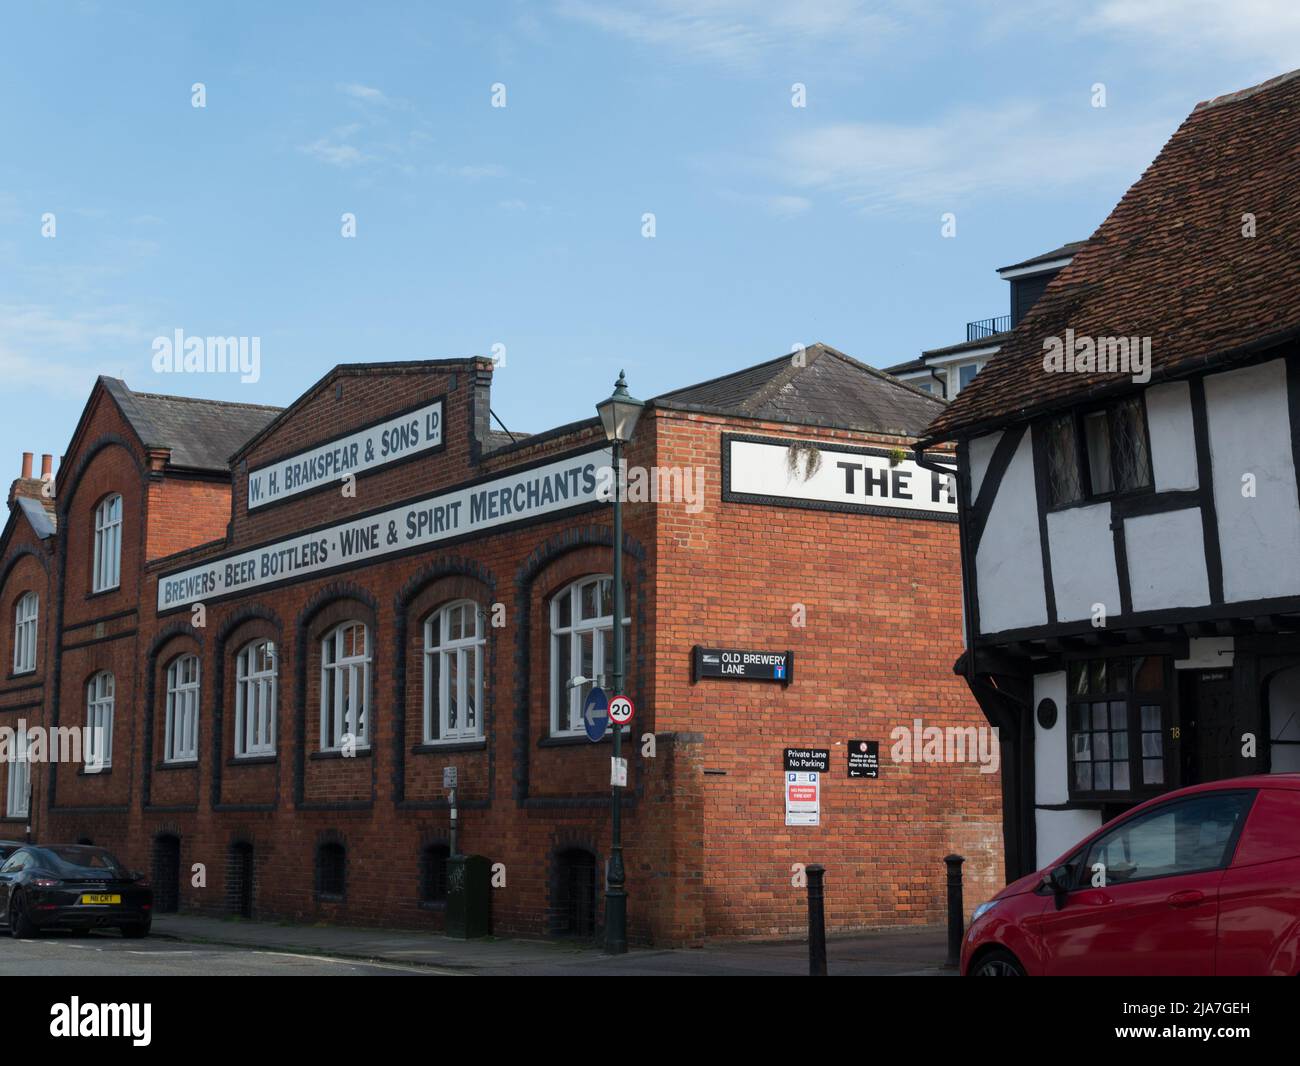 W H Brakspear and Sons Ltd Brewers beer bottlers wine and spirits merchants historic red brick building in Bell Street Henley-on-Thames Oxfordshire En Stock Photo